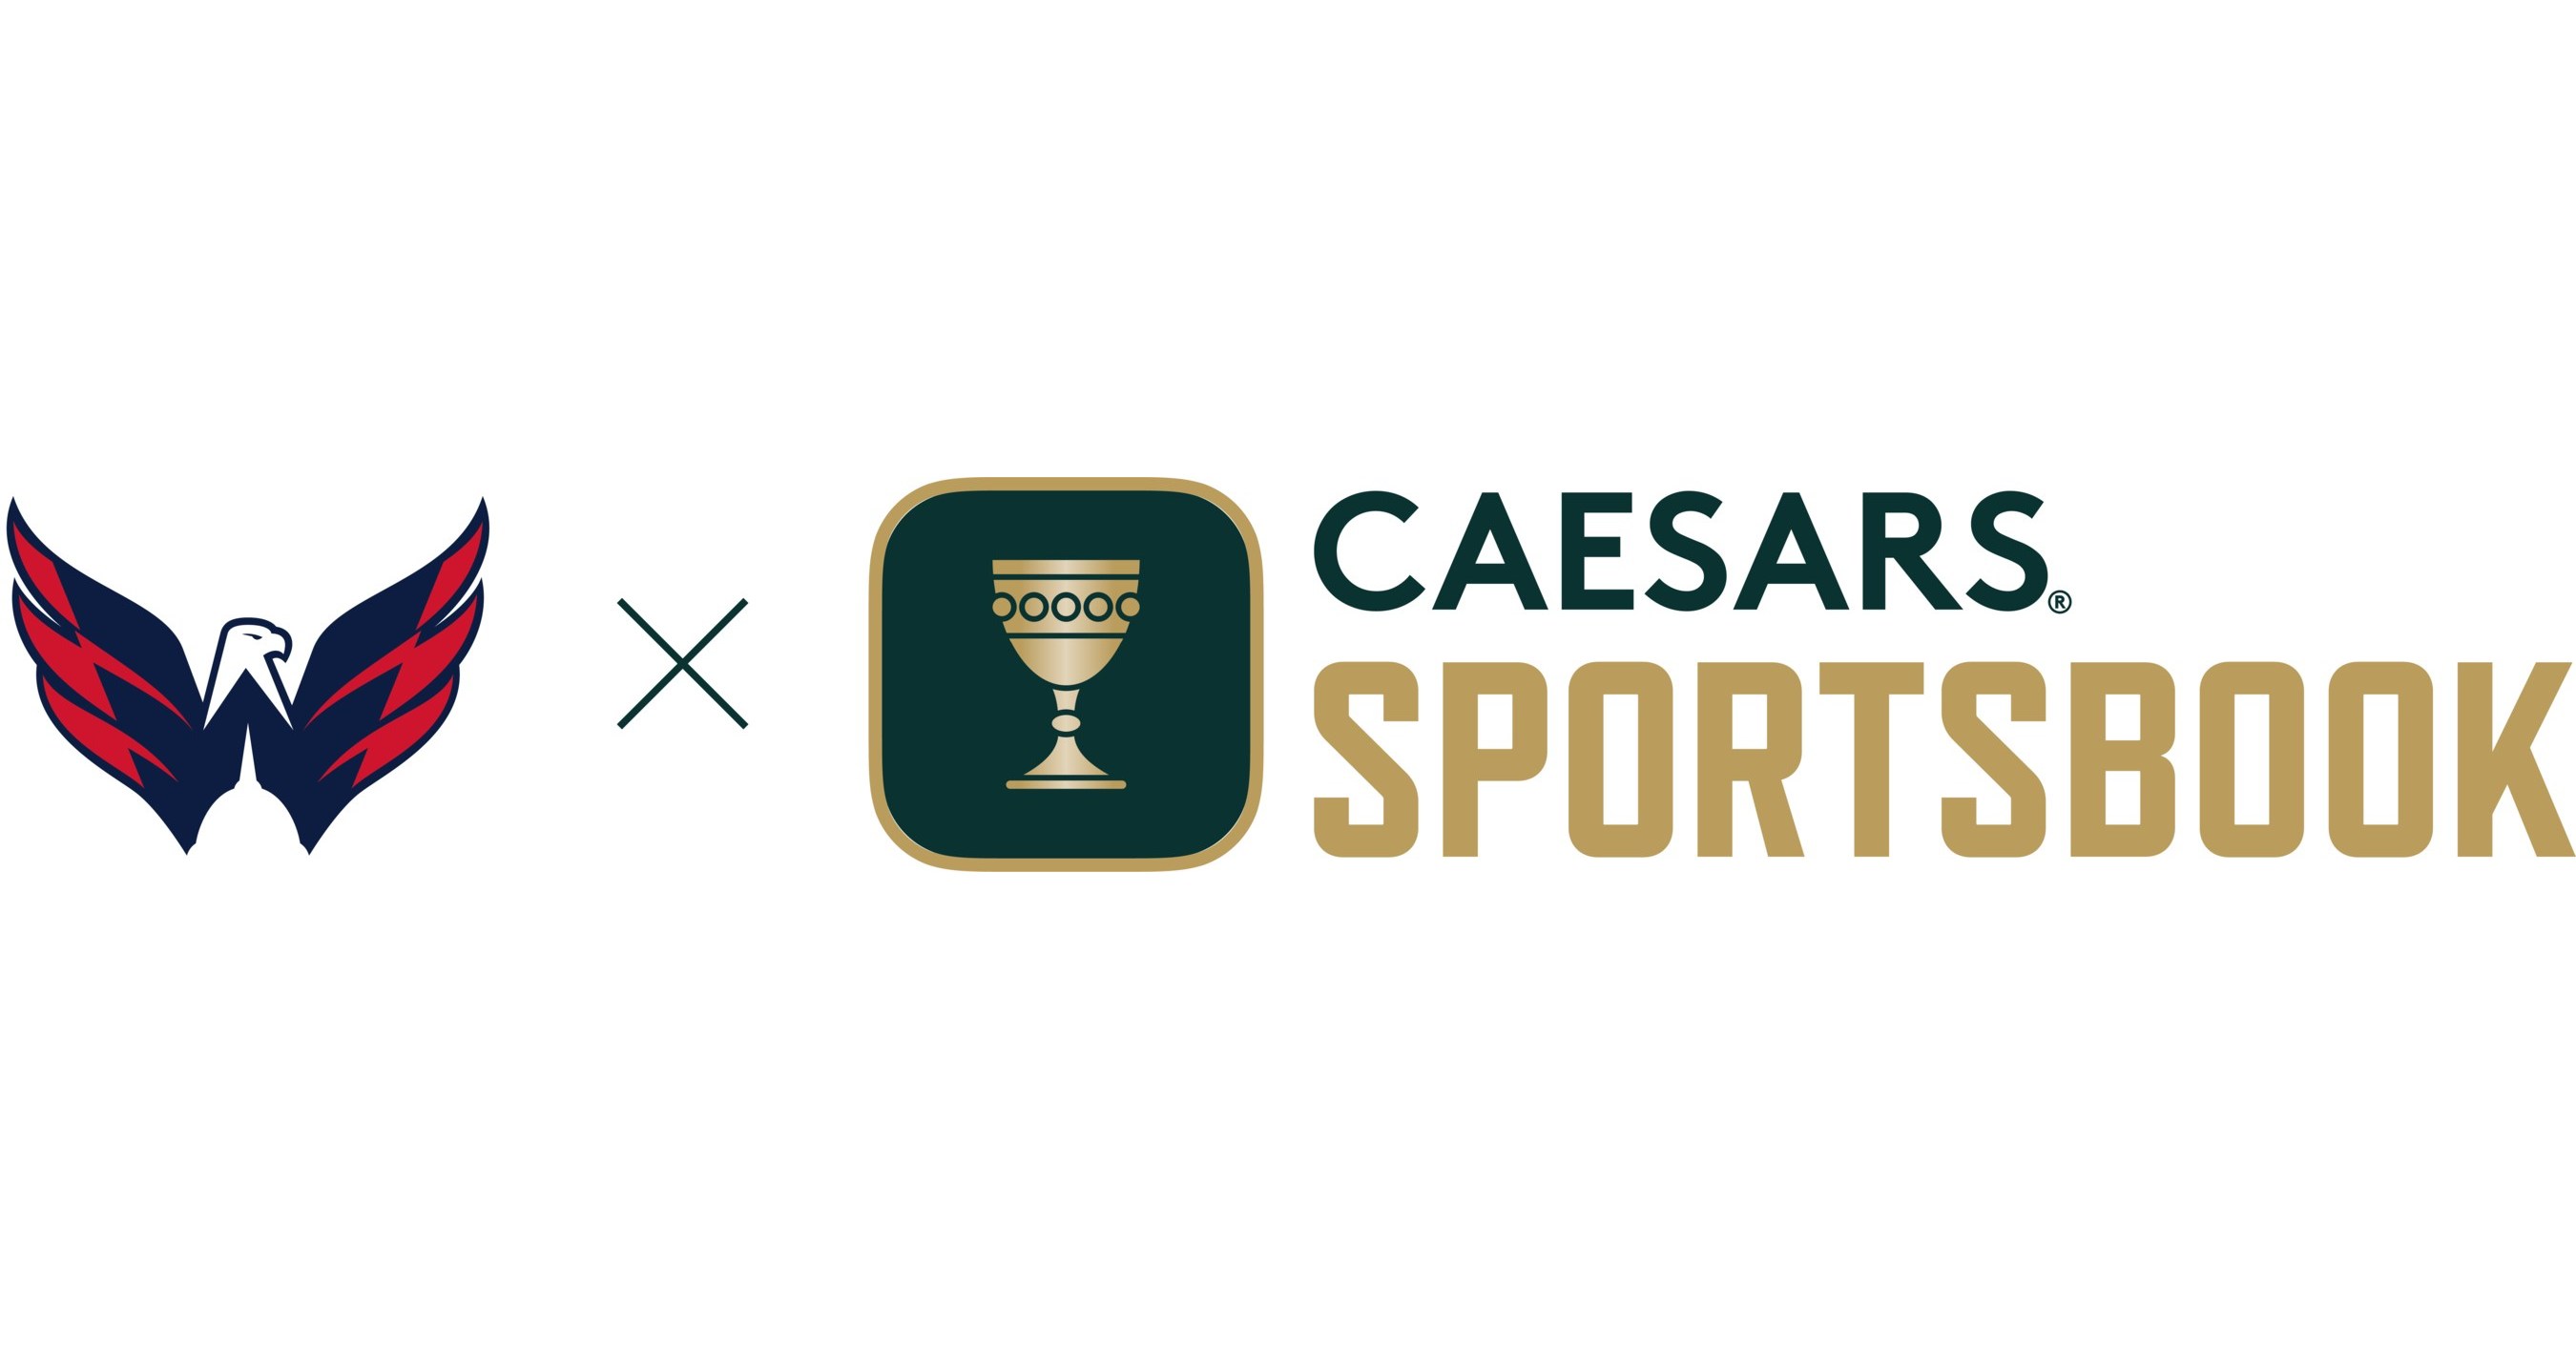 Washington Capitals - Introducing a first-of-its-kind partnership We are  #ALLCAPS We are all Caesars Sportsbook Coming in 2022-23 and beyond, the  WashCaps.com/JerseyPatch!